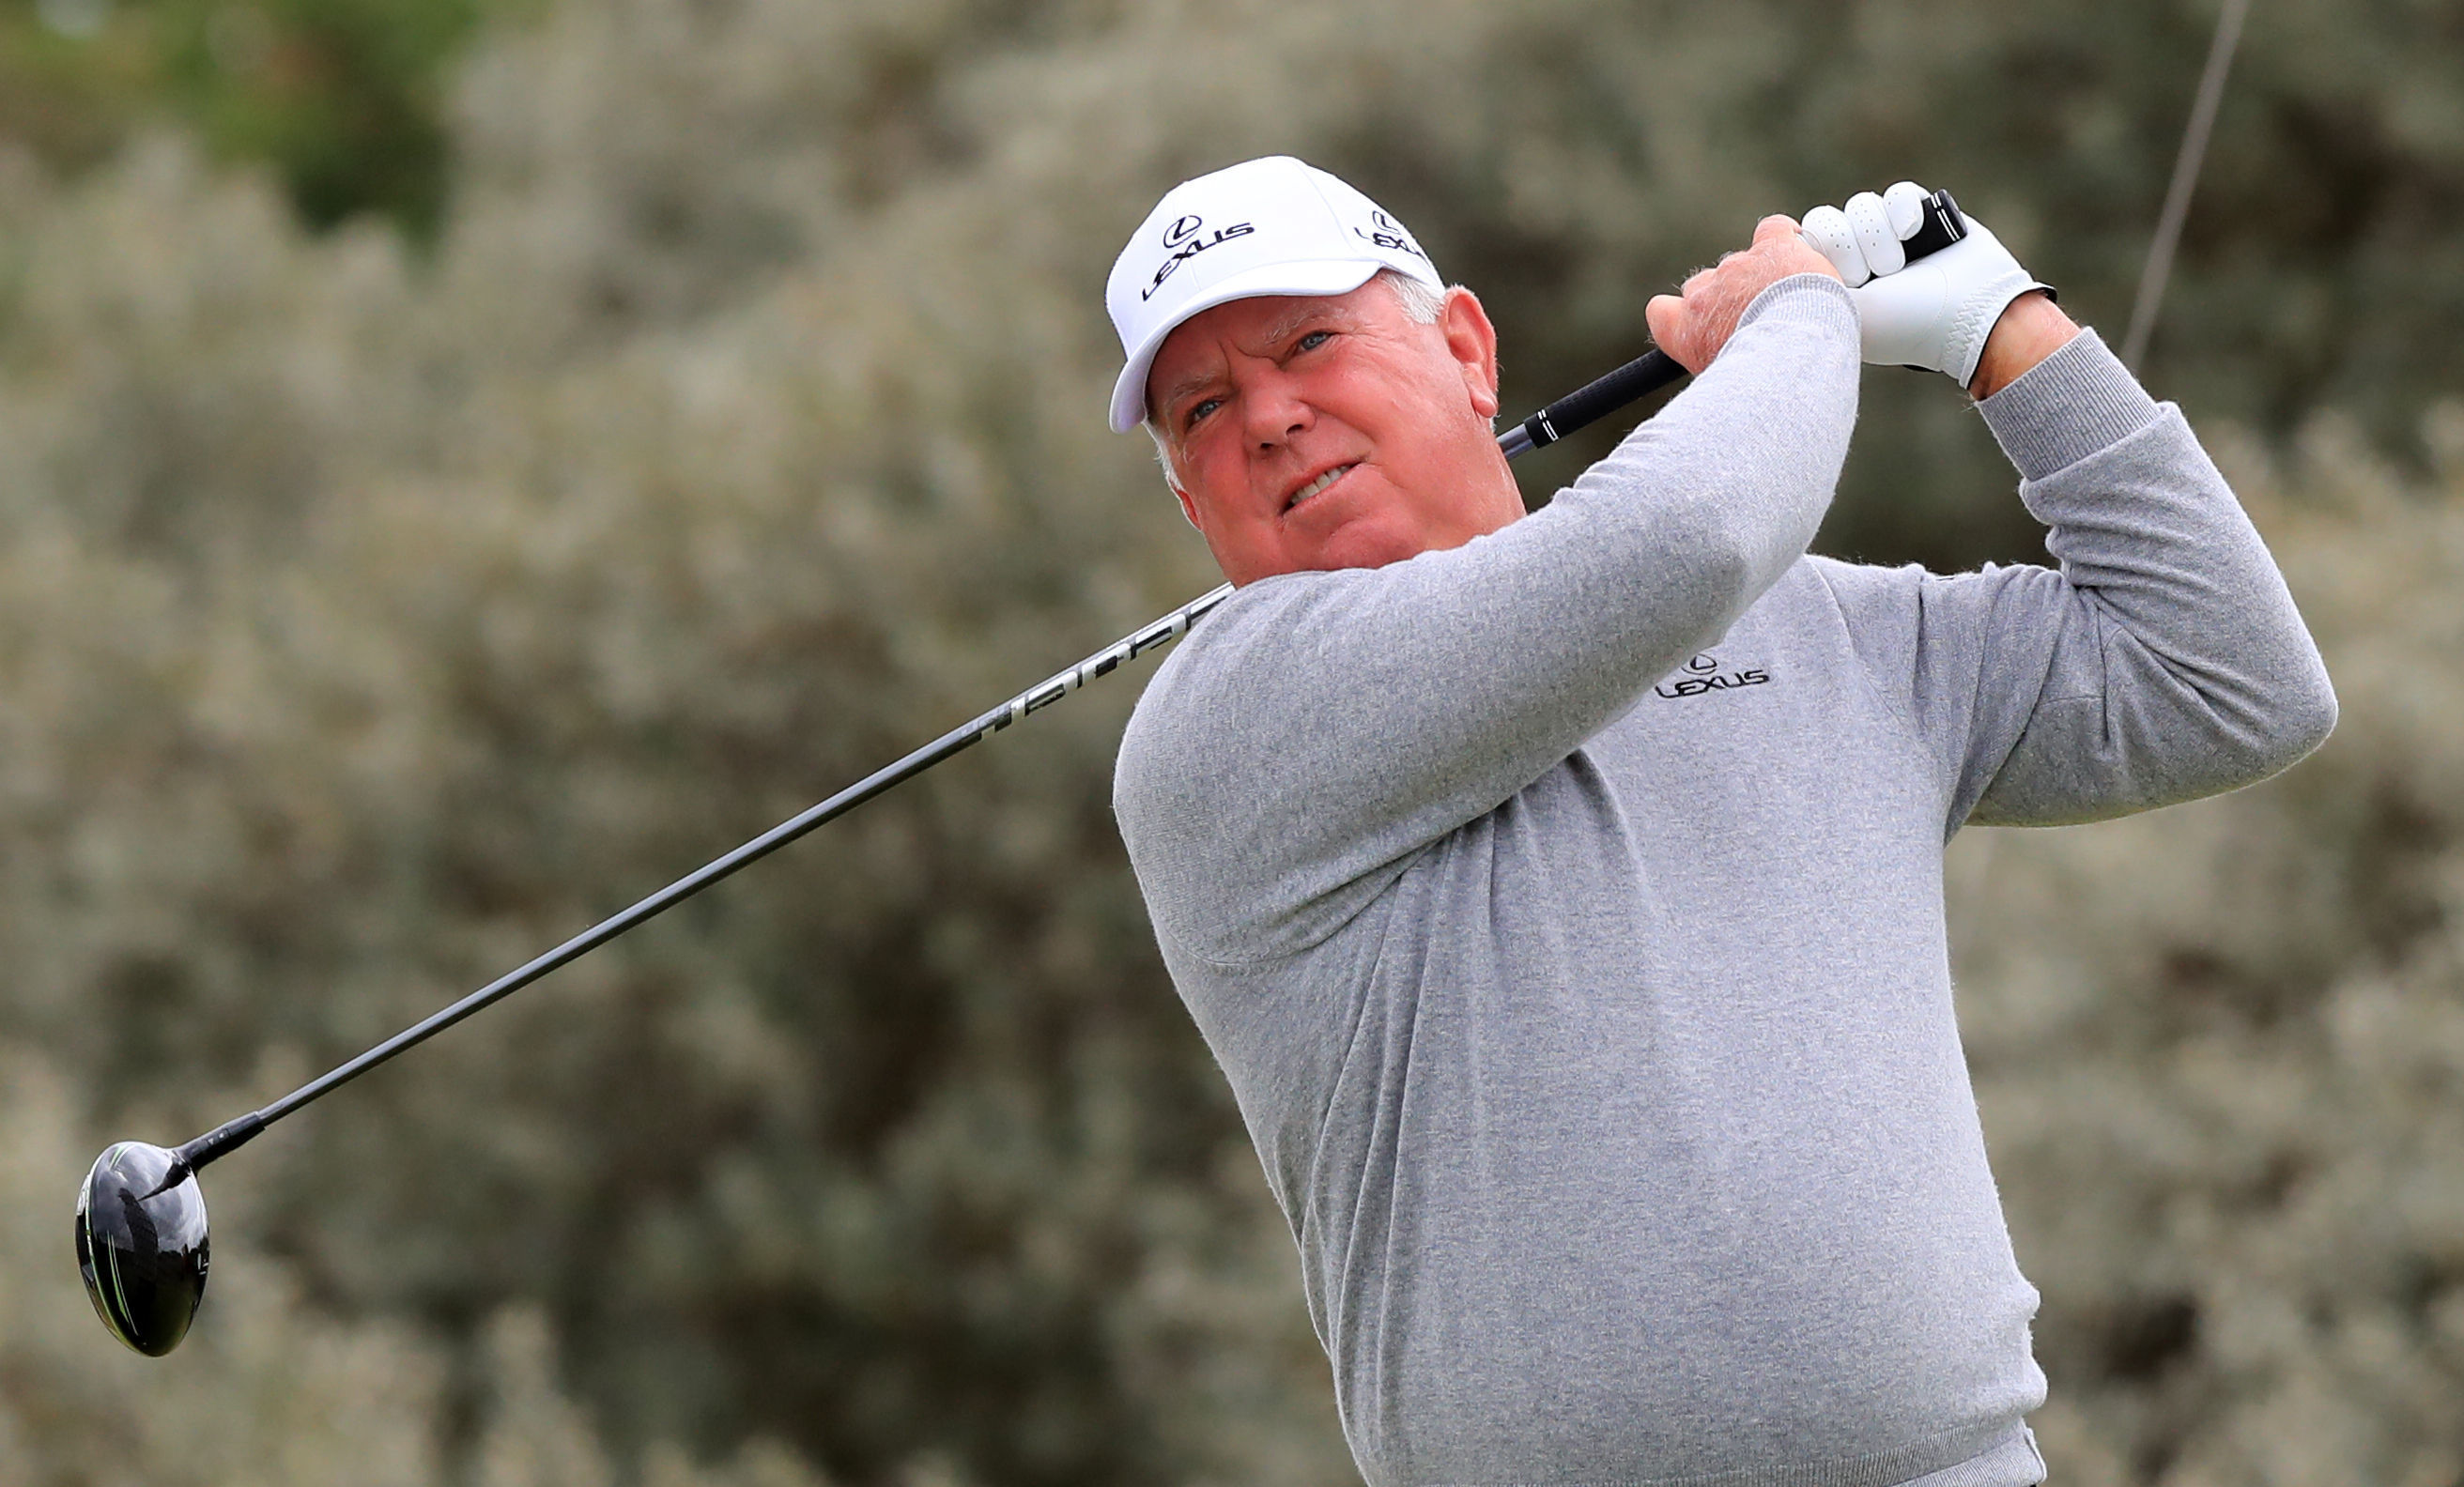 Mark O'Meara shot a par 70 on his final round in the Open Championship.